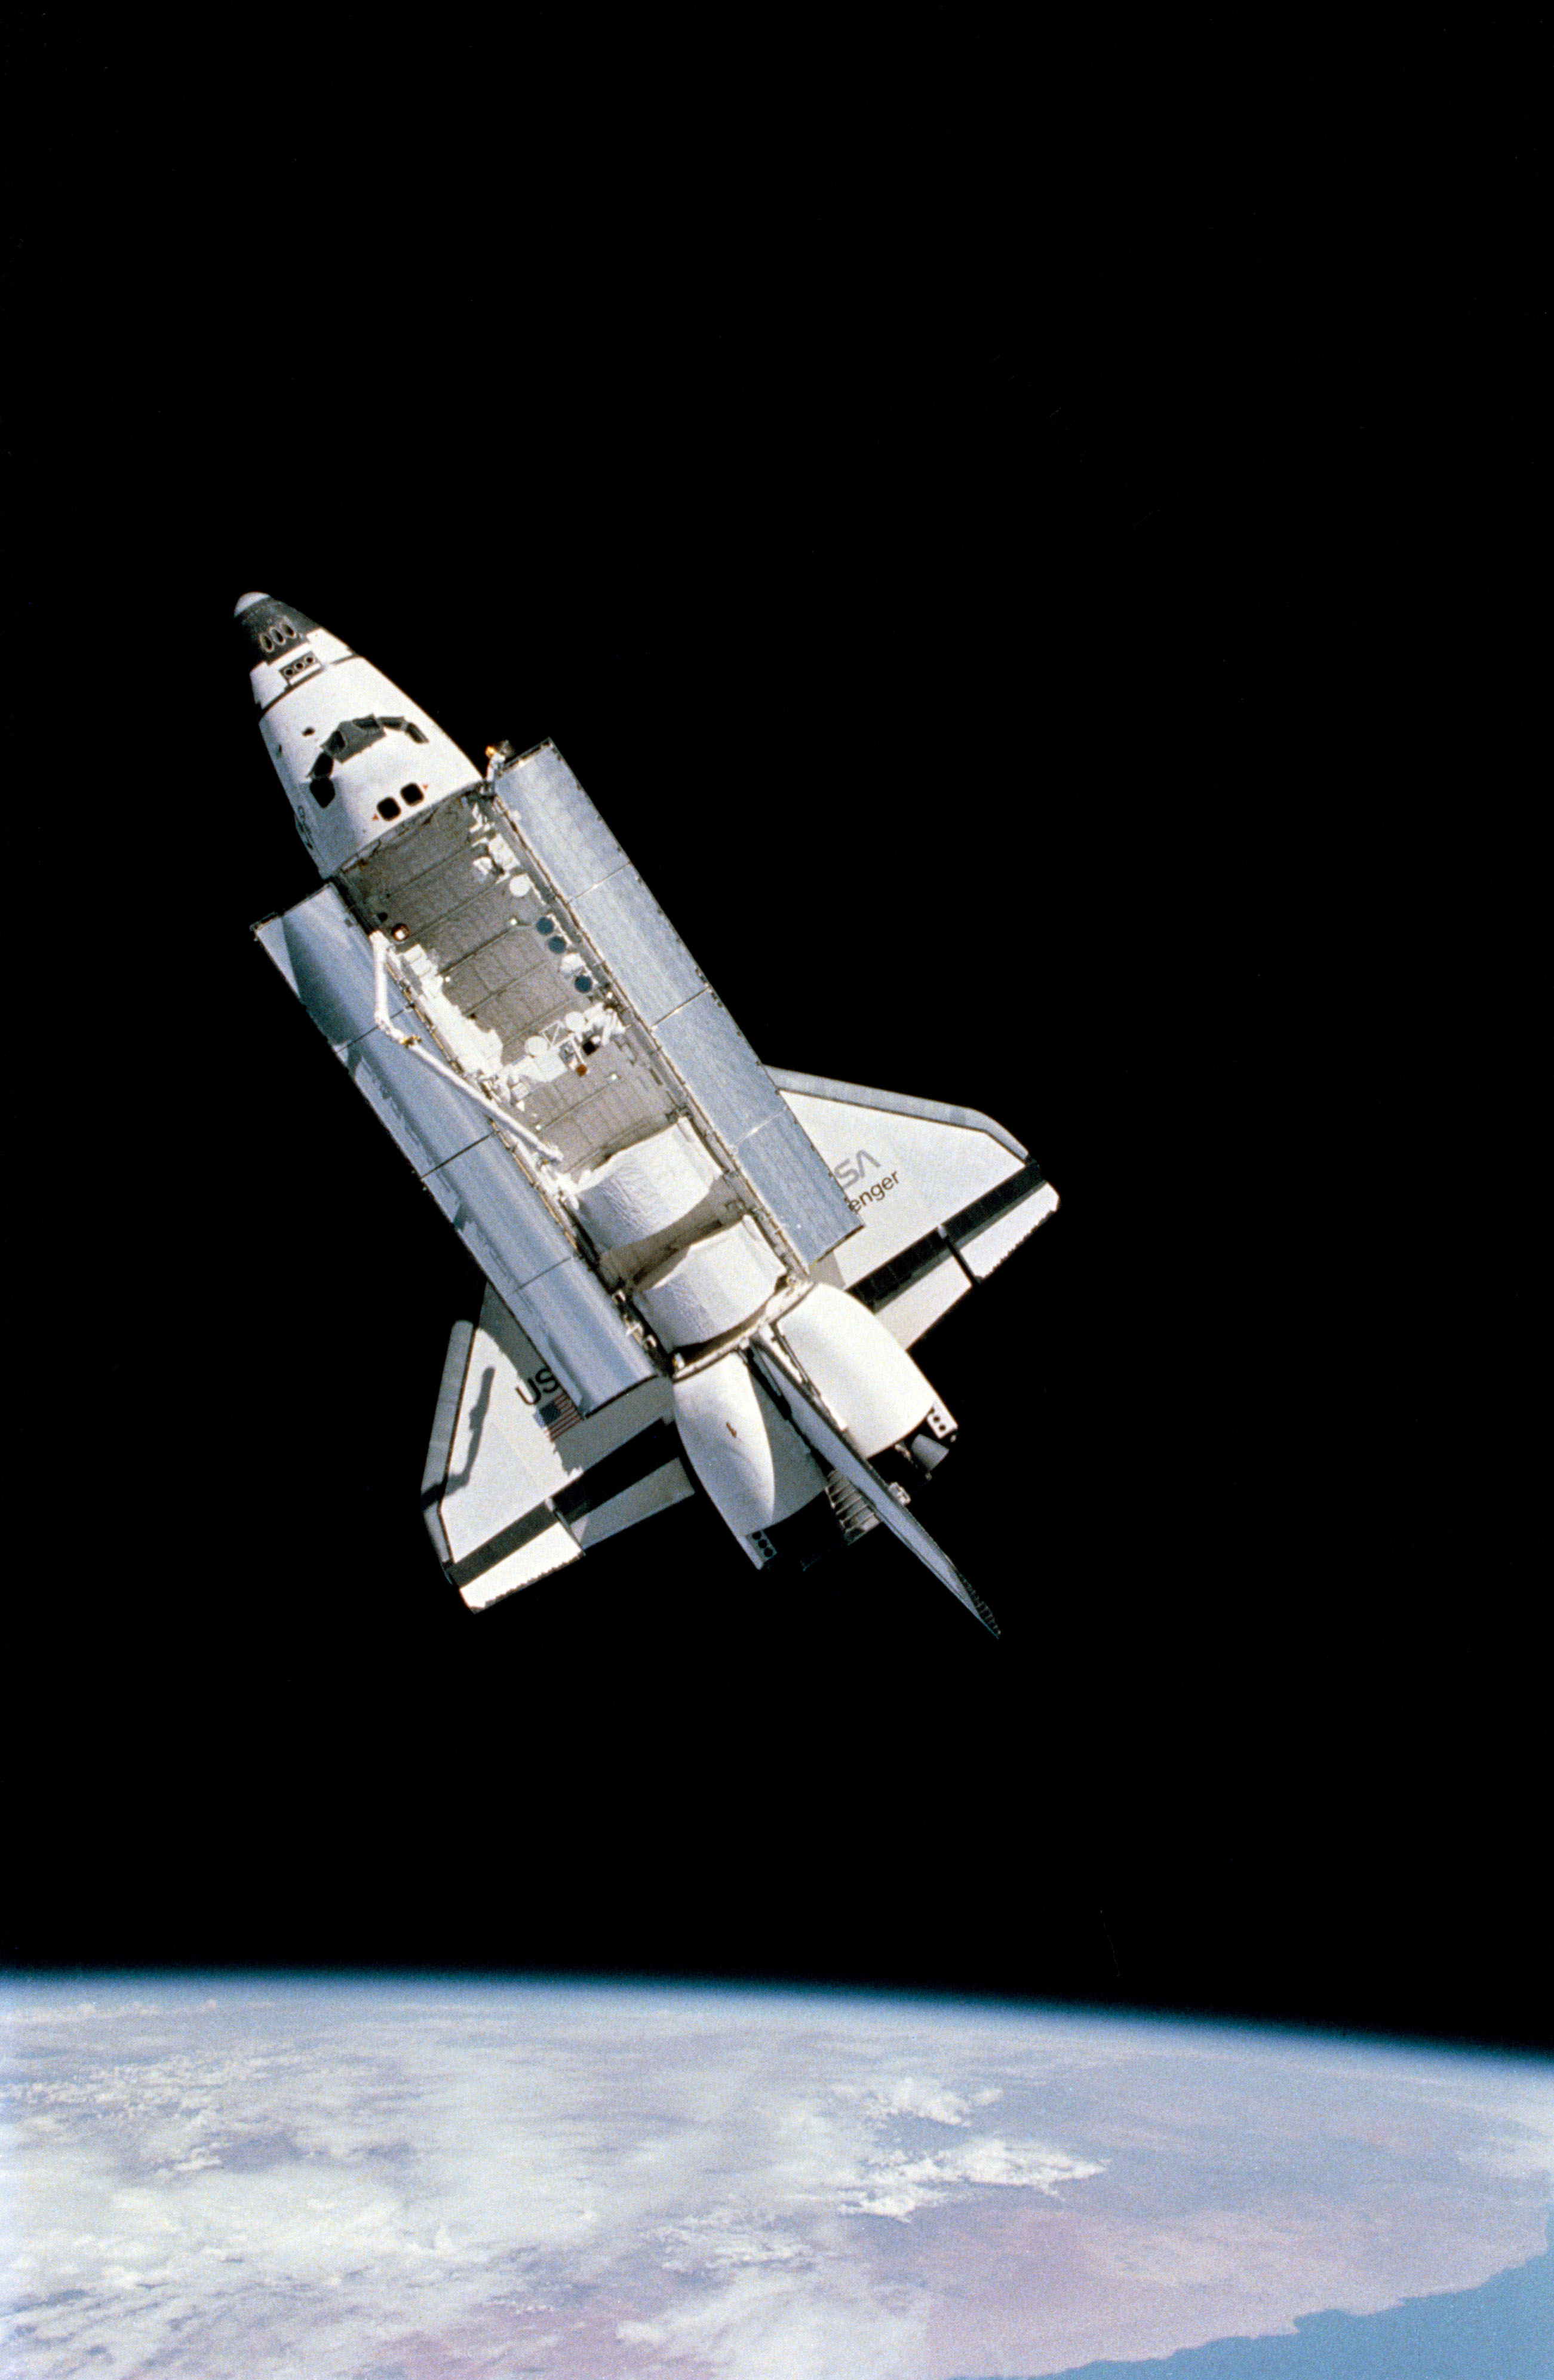 View of Challenger from McCandless’ vantage point